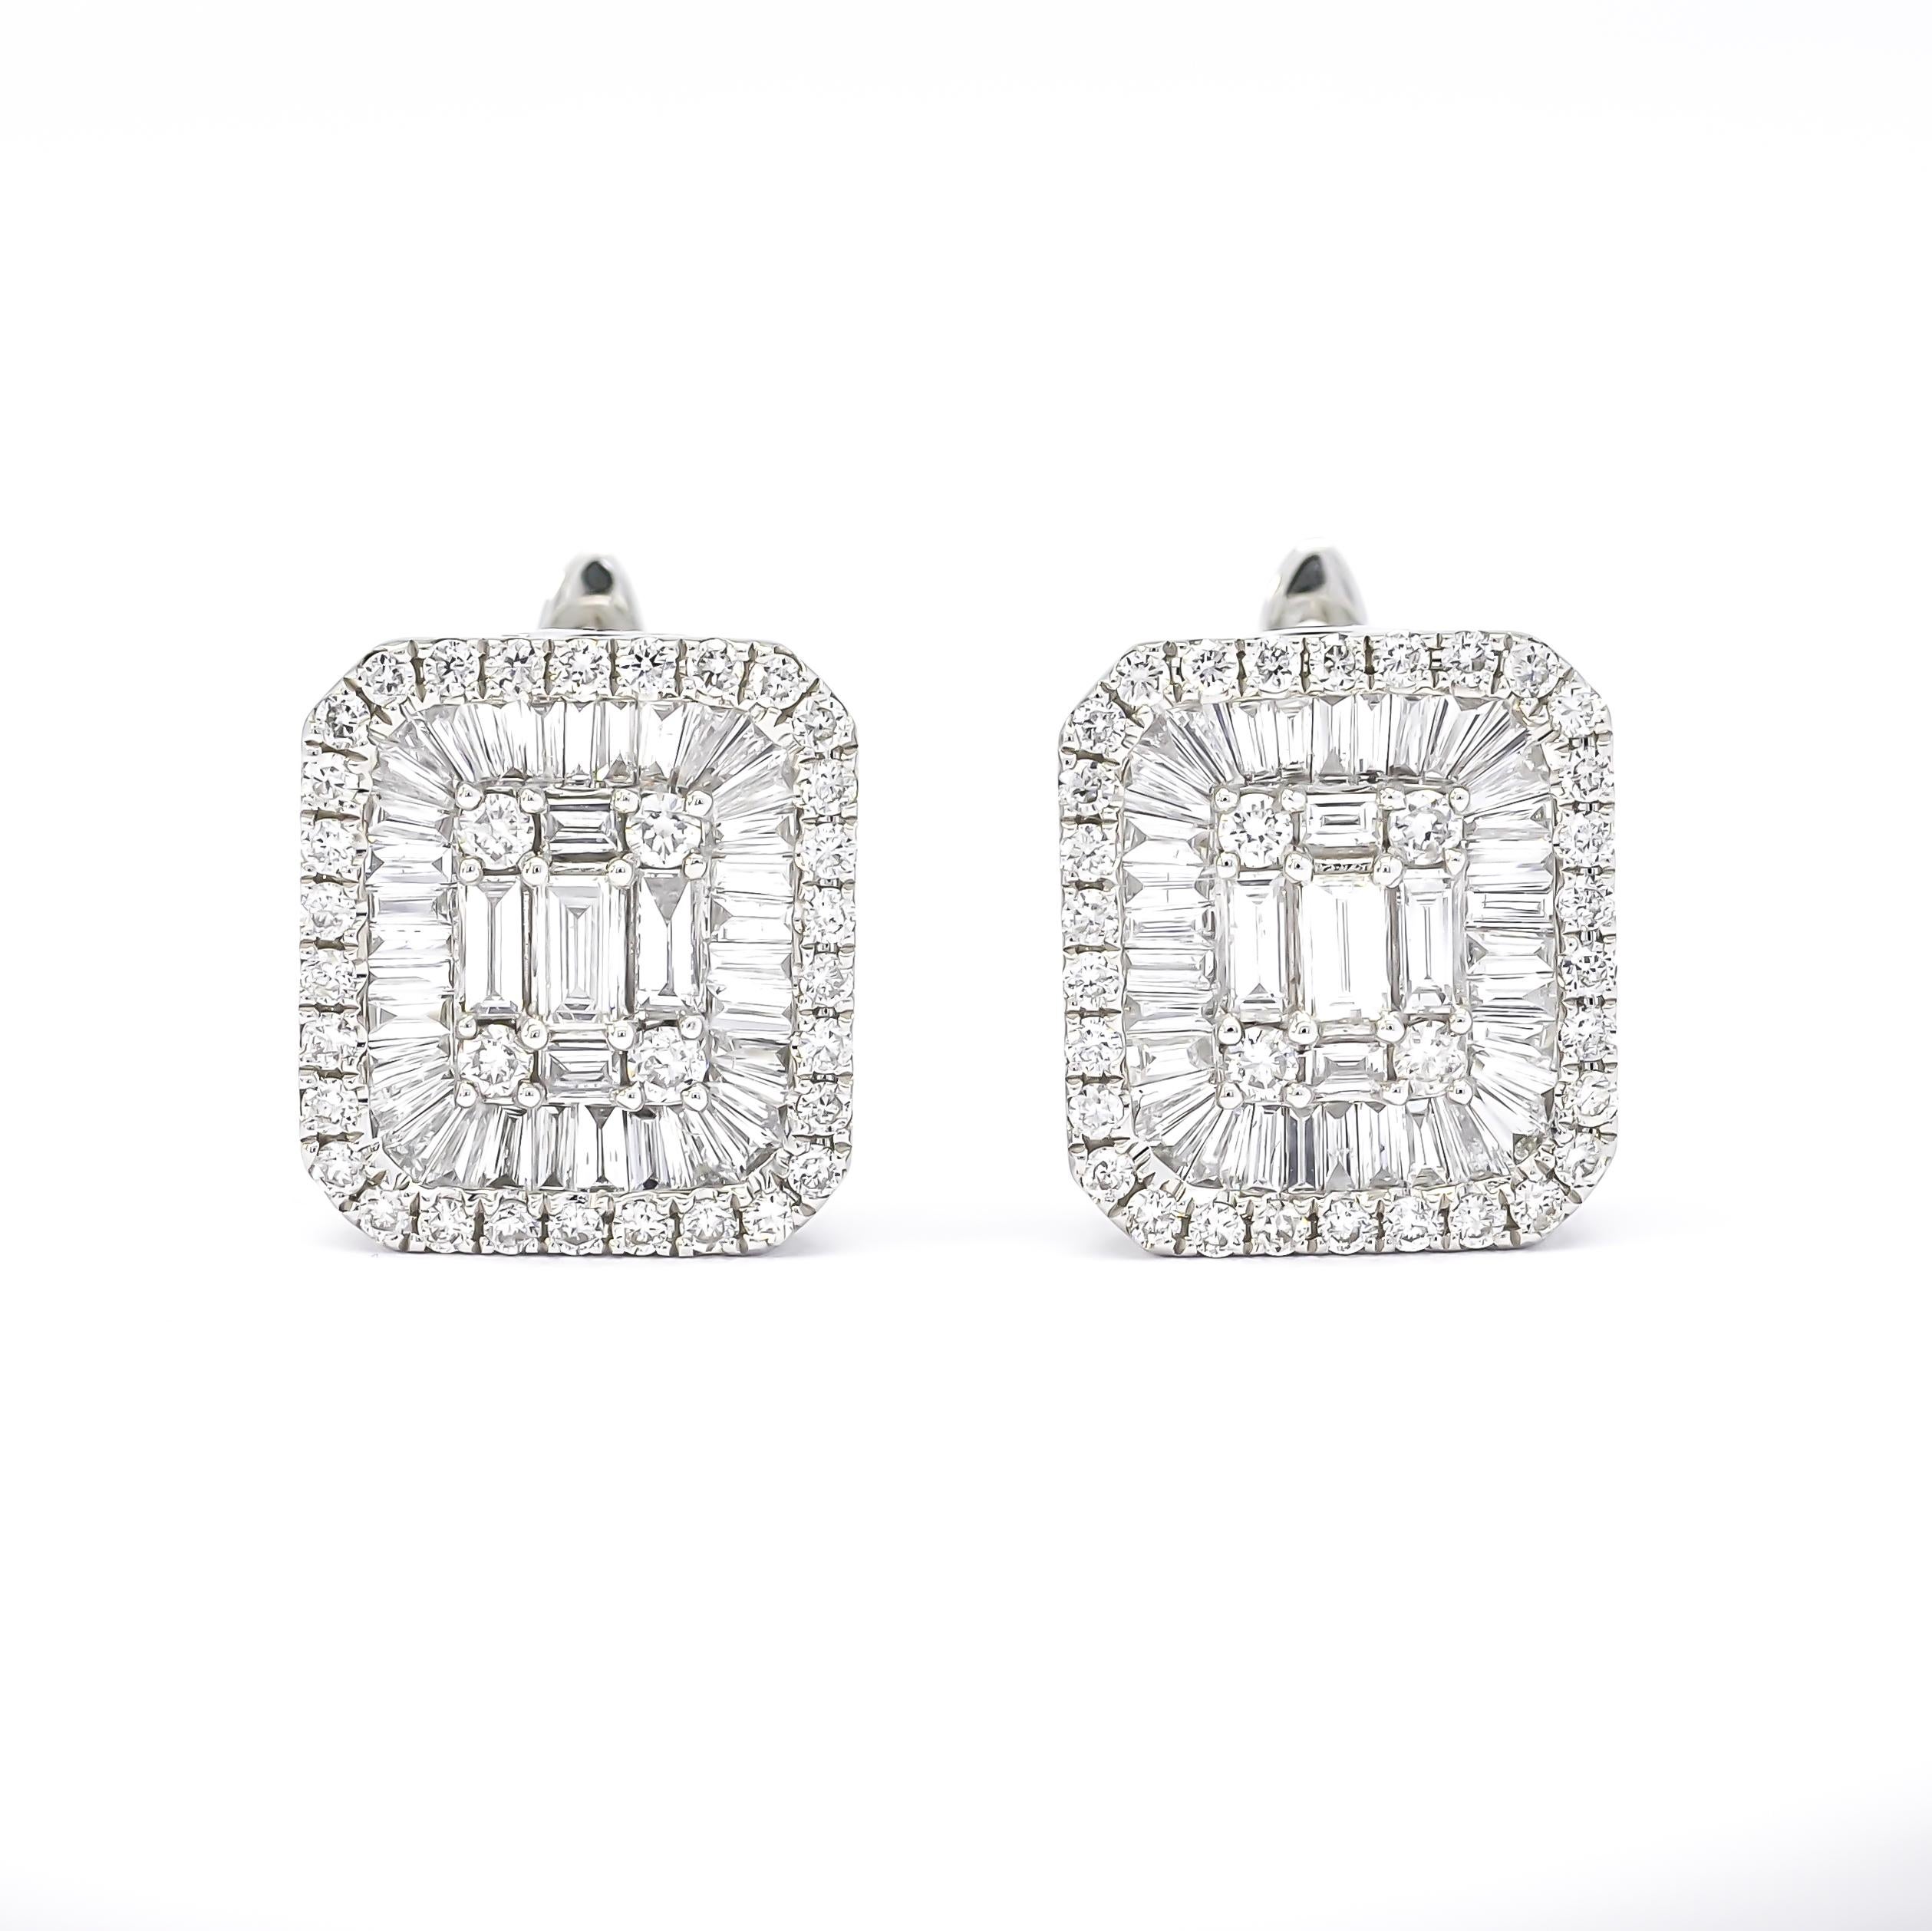 Introducing our stunning Natural Diamond Earrings in 18KT White Gold, featuring an Illusion Halo Cluster design. These earrings are the epitome of modern elegance, designed to enhance the style and beauty of women.

Crafted with meticulous attention